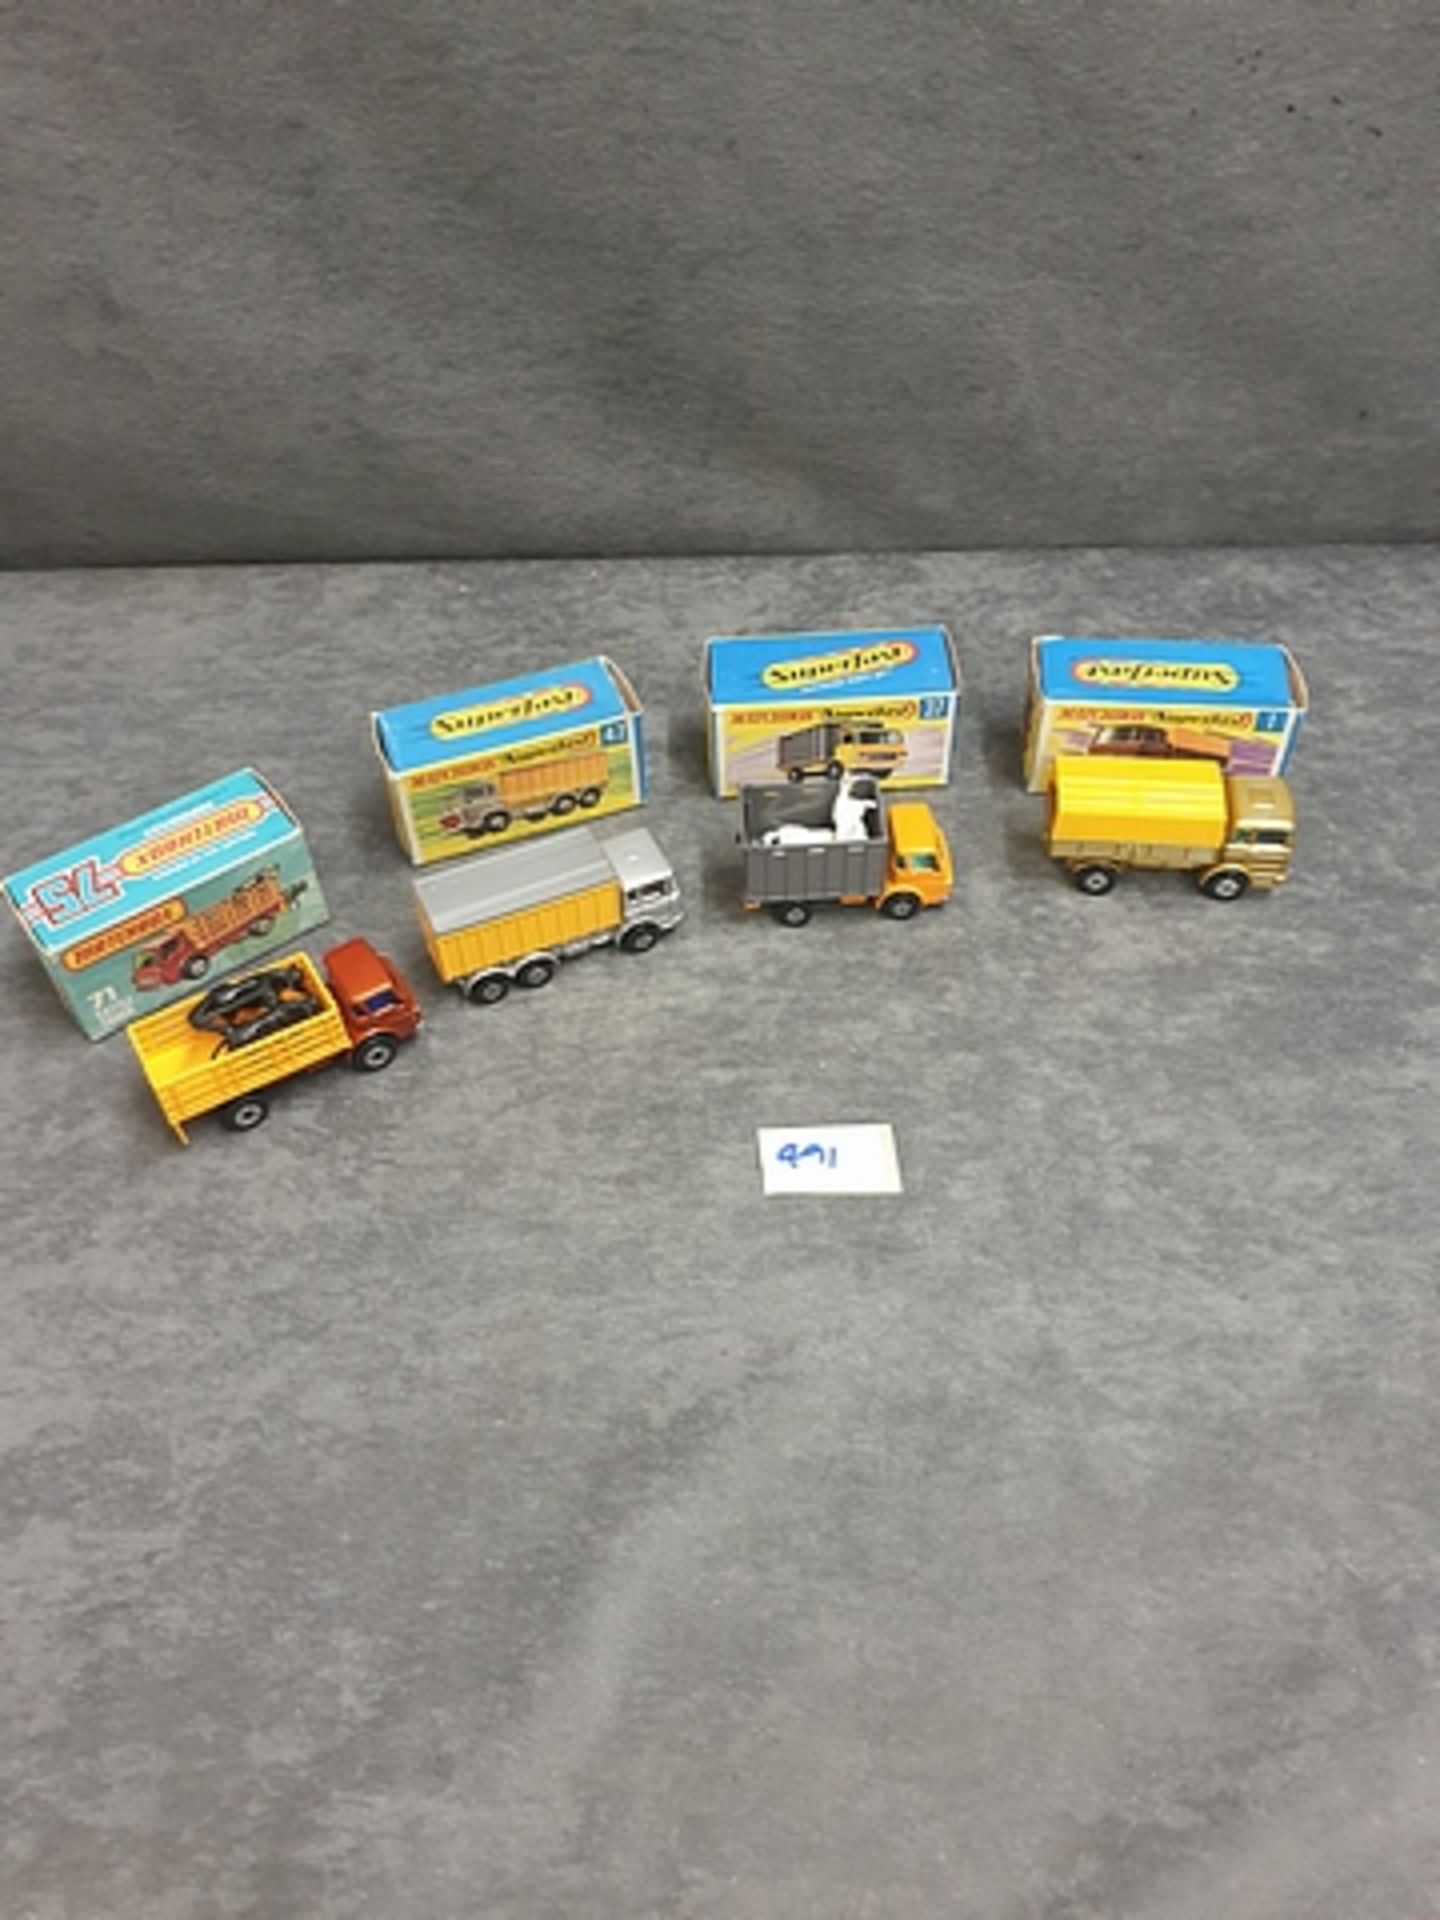 Matchbox Diecast Vehicles Relating To Trucks, All Models Are Mint With Firm To Crisp Boxes